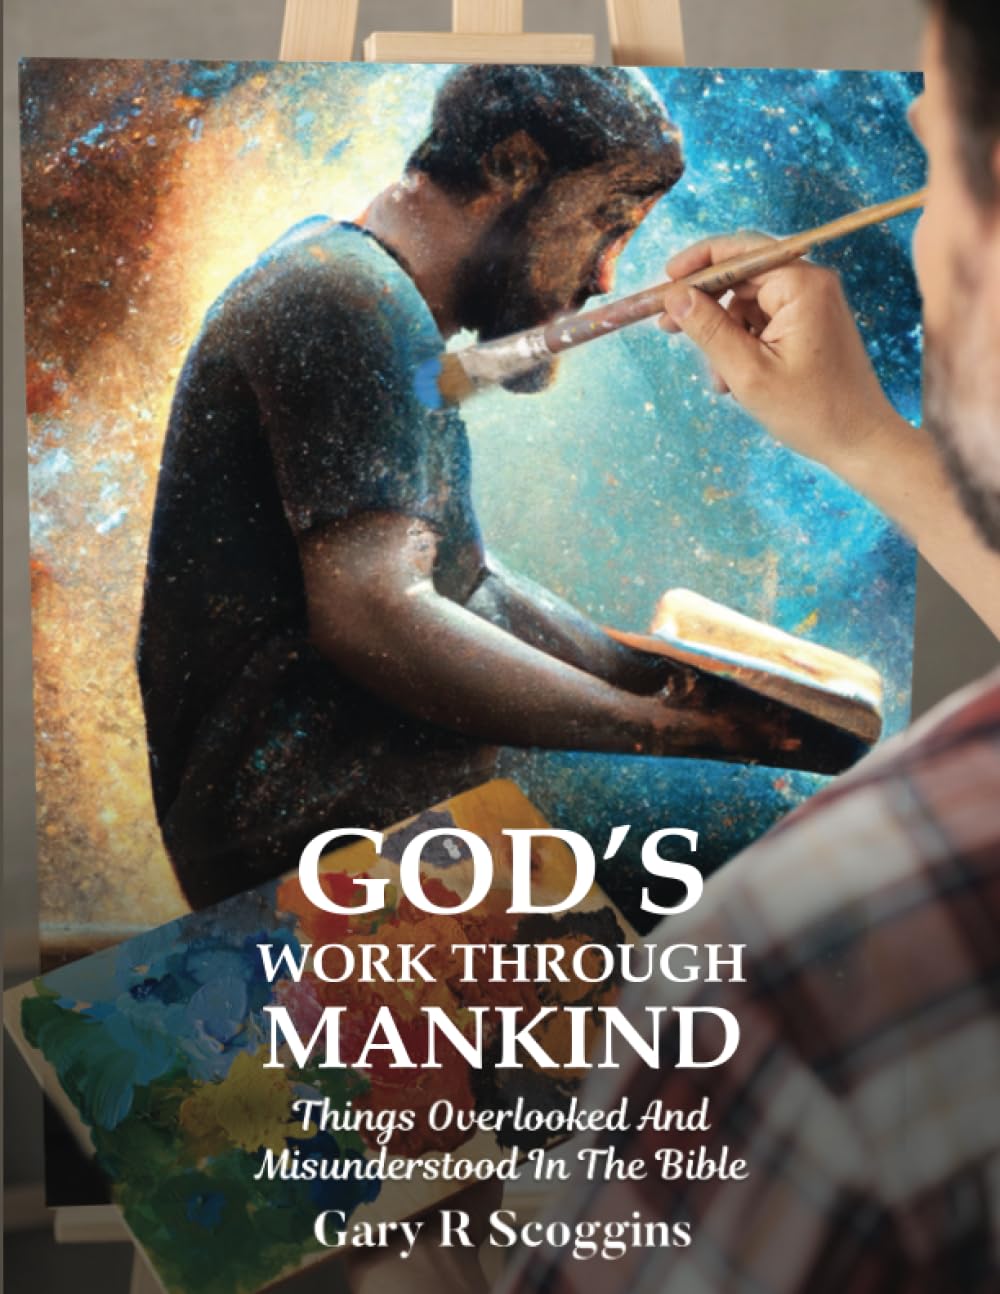 Strengthen The Understanding Of Faith And Bible With ‘God's Work Through Mankind’ - A Book To Help The Reader Know The Overlooked Truths Of The Bible 